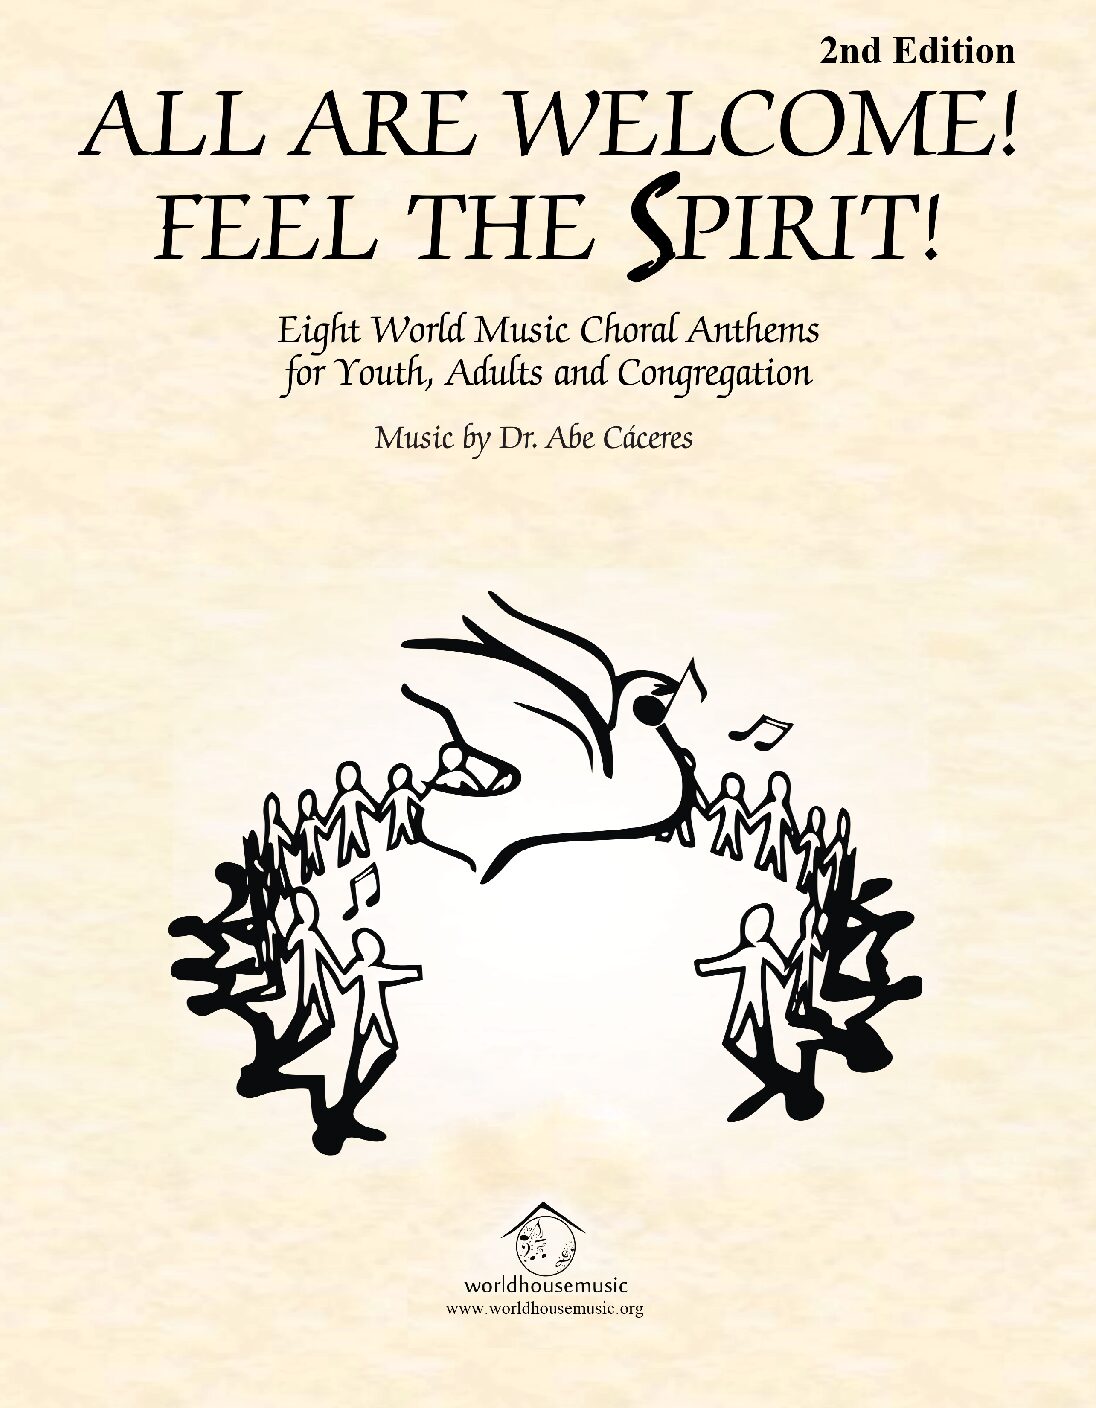 All Are Welcome! Feel the Spirit! (Deluxe Spiral Edition) *** Coming Soon to Store ***